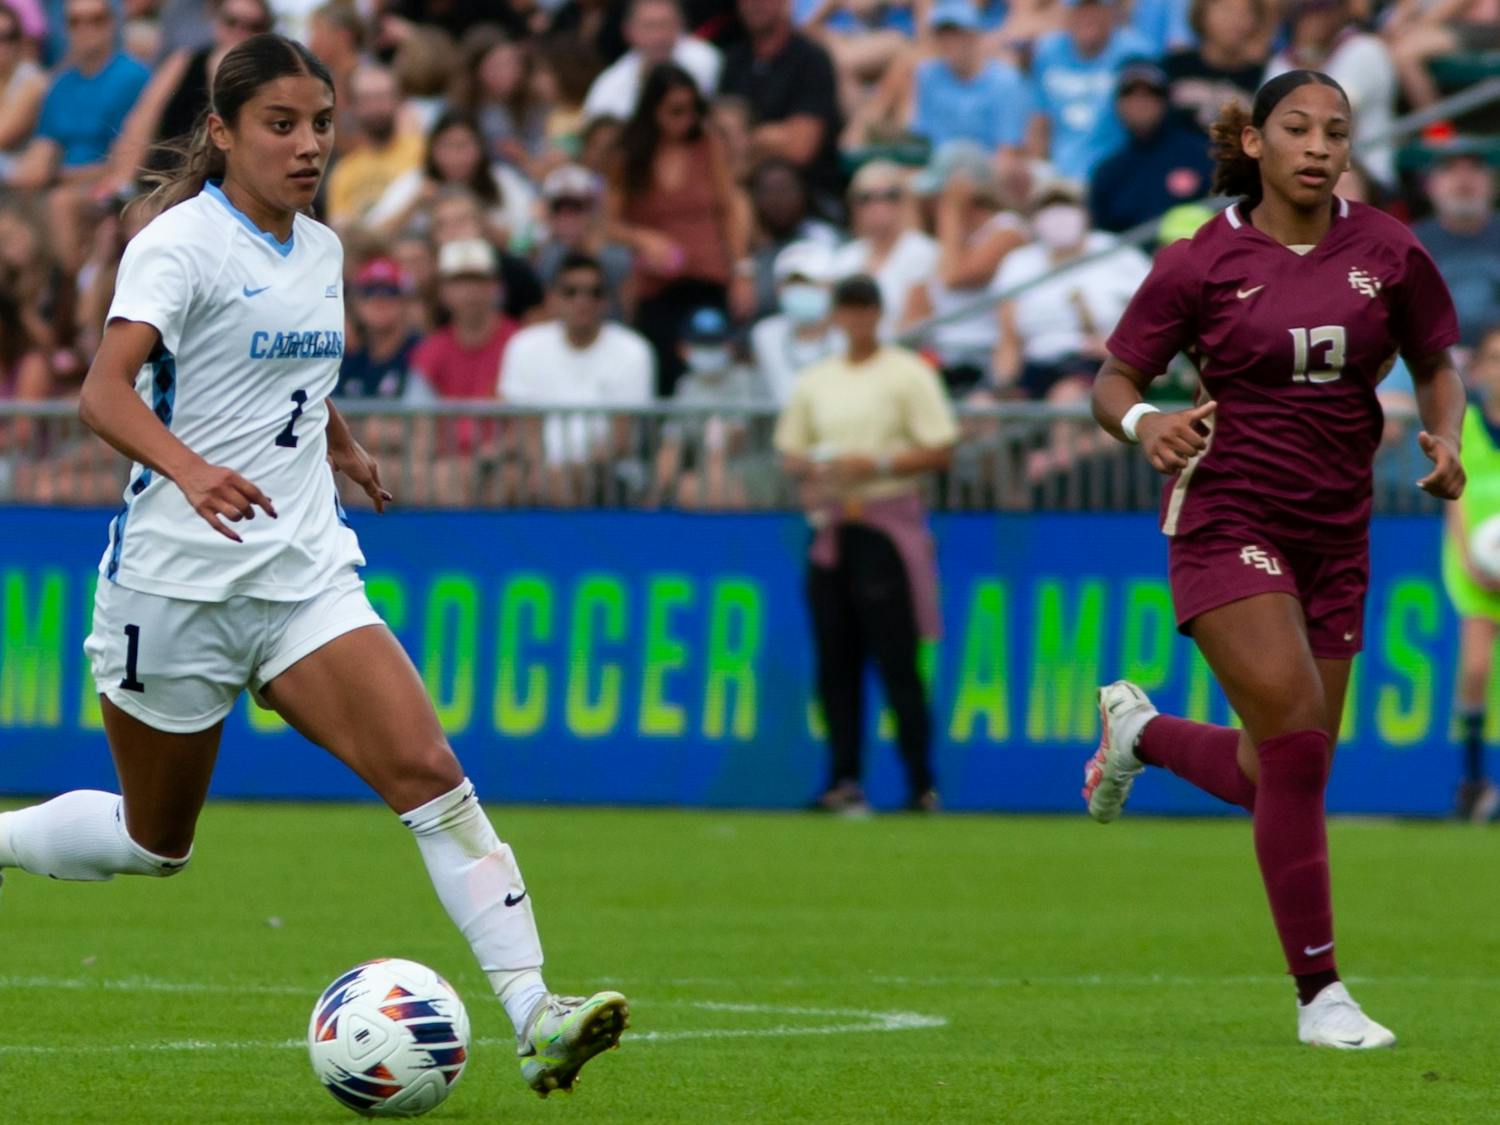 UNC junior forward Sam Meza (1) dribbles the ball during the women's soccer 1-2 loss in the ACC Finals against FSU at WakeMed Soccer Park on Sunday, Nov. 6, 2022.